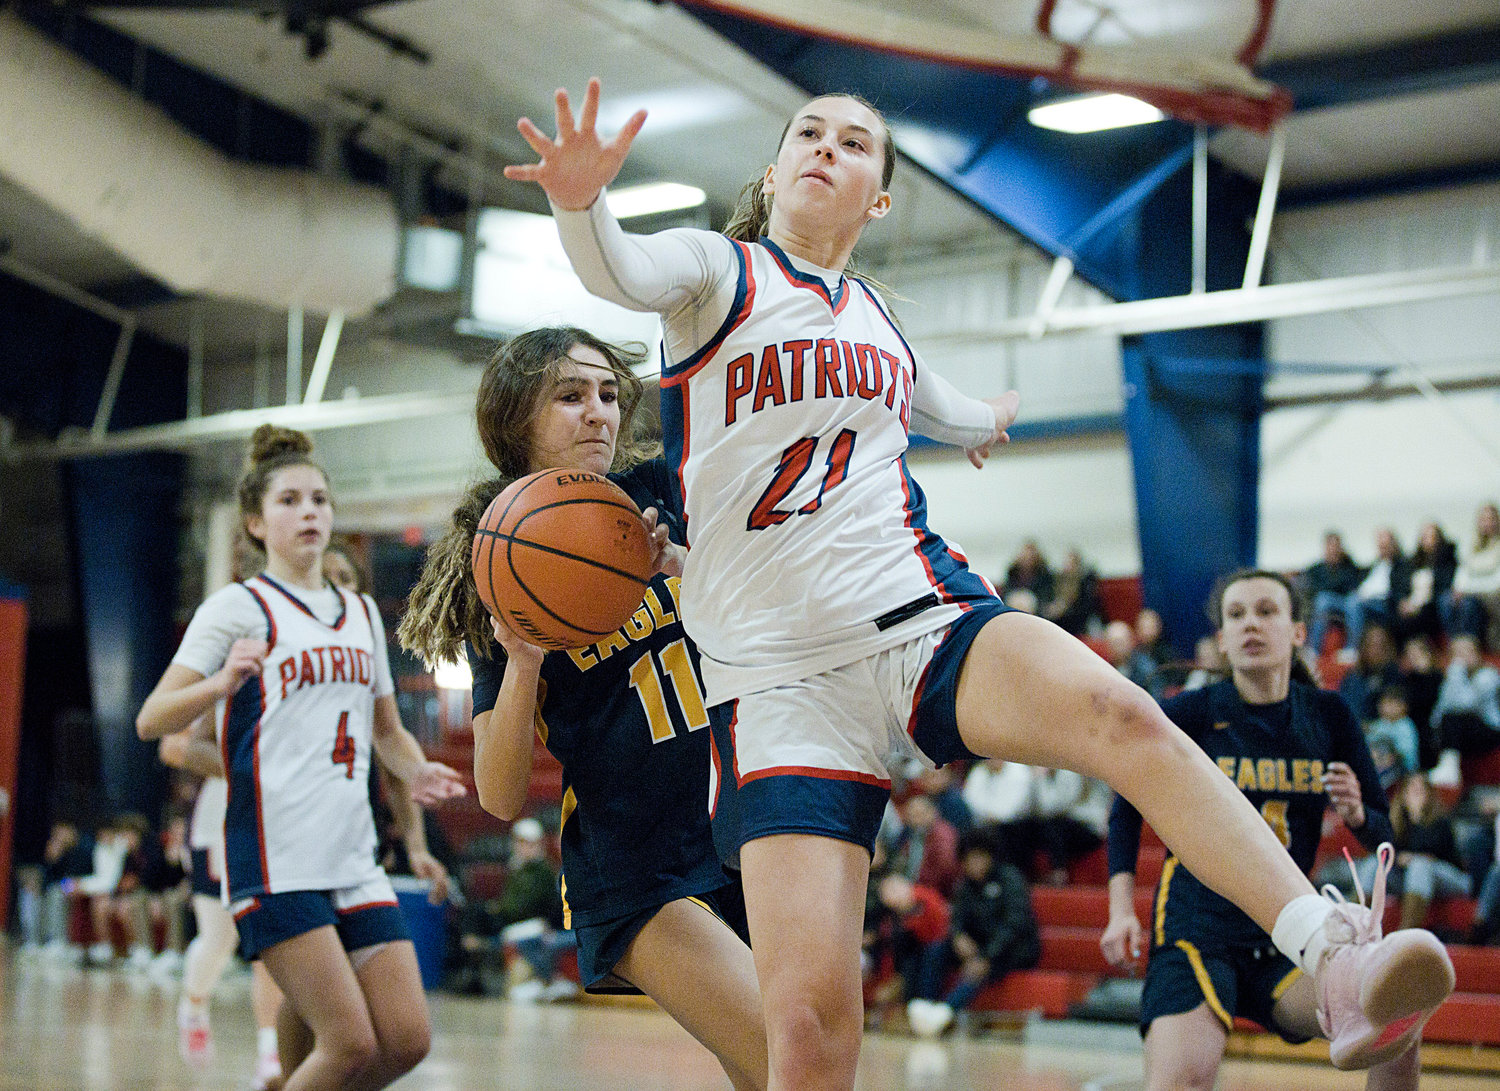 Ava Hackley leaps in front of Barrington’s Olivia Morrissette, preventing her from shooting.